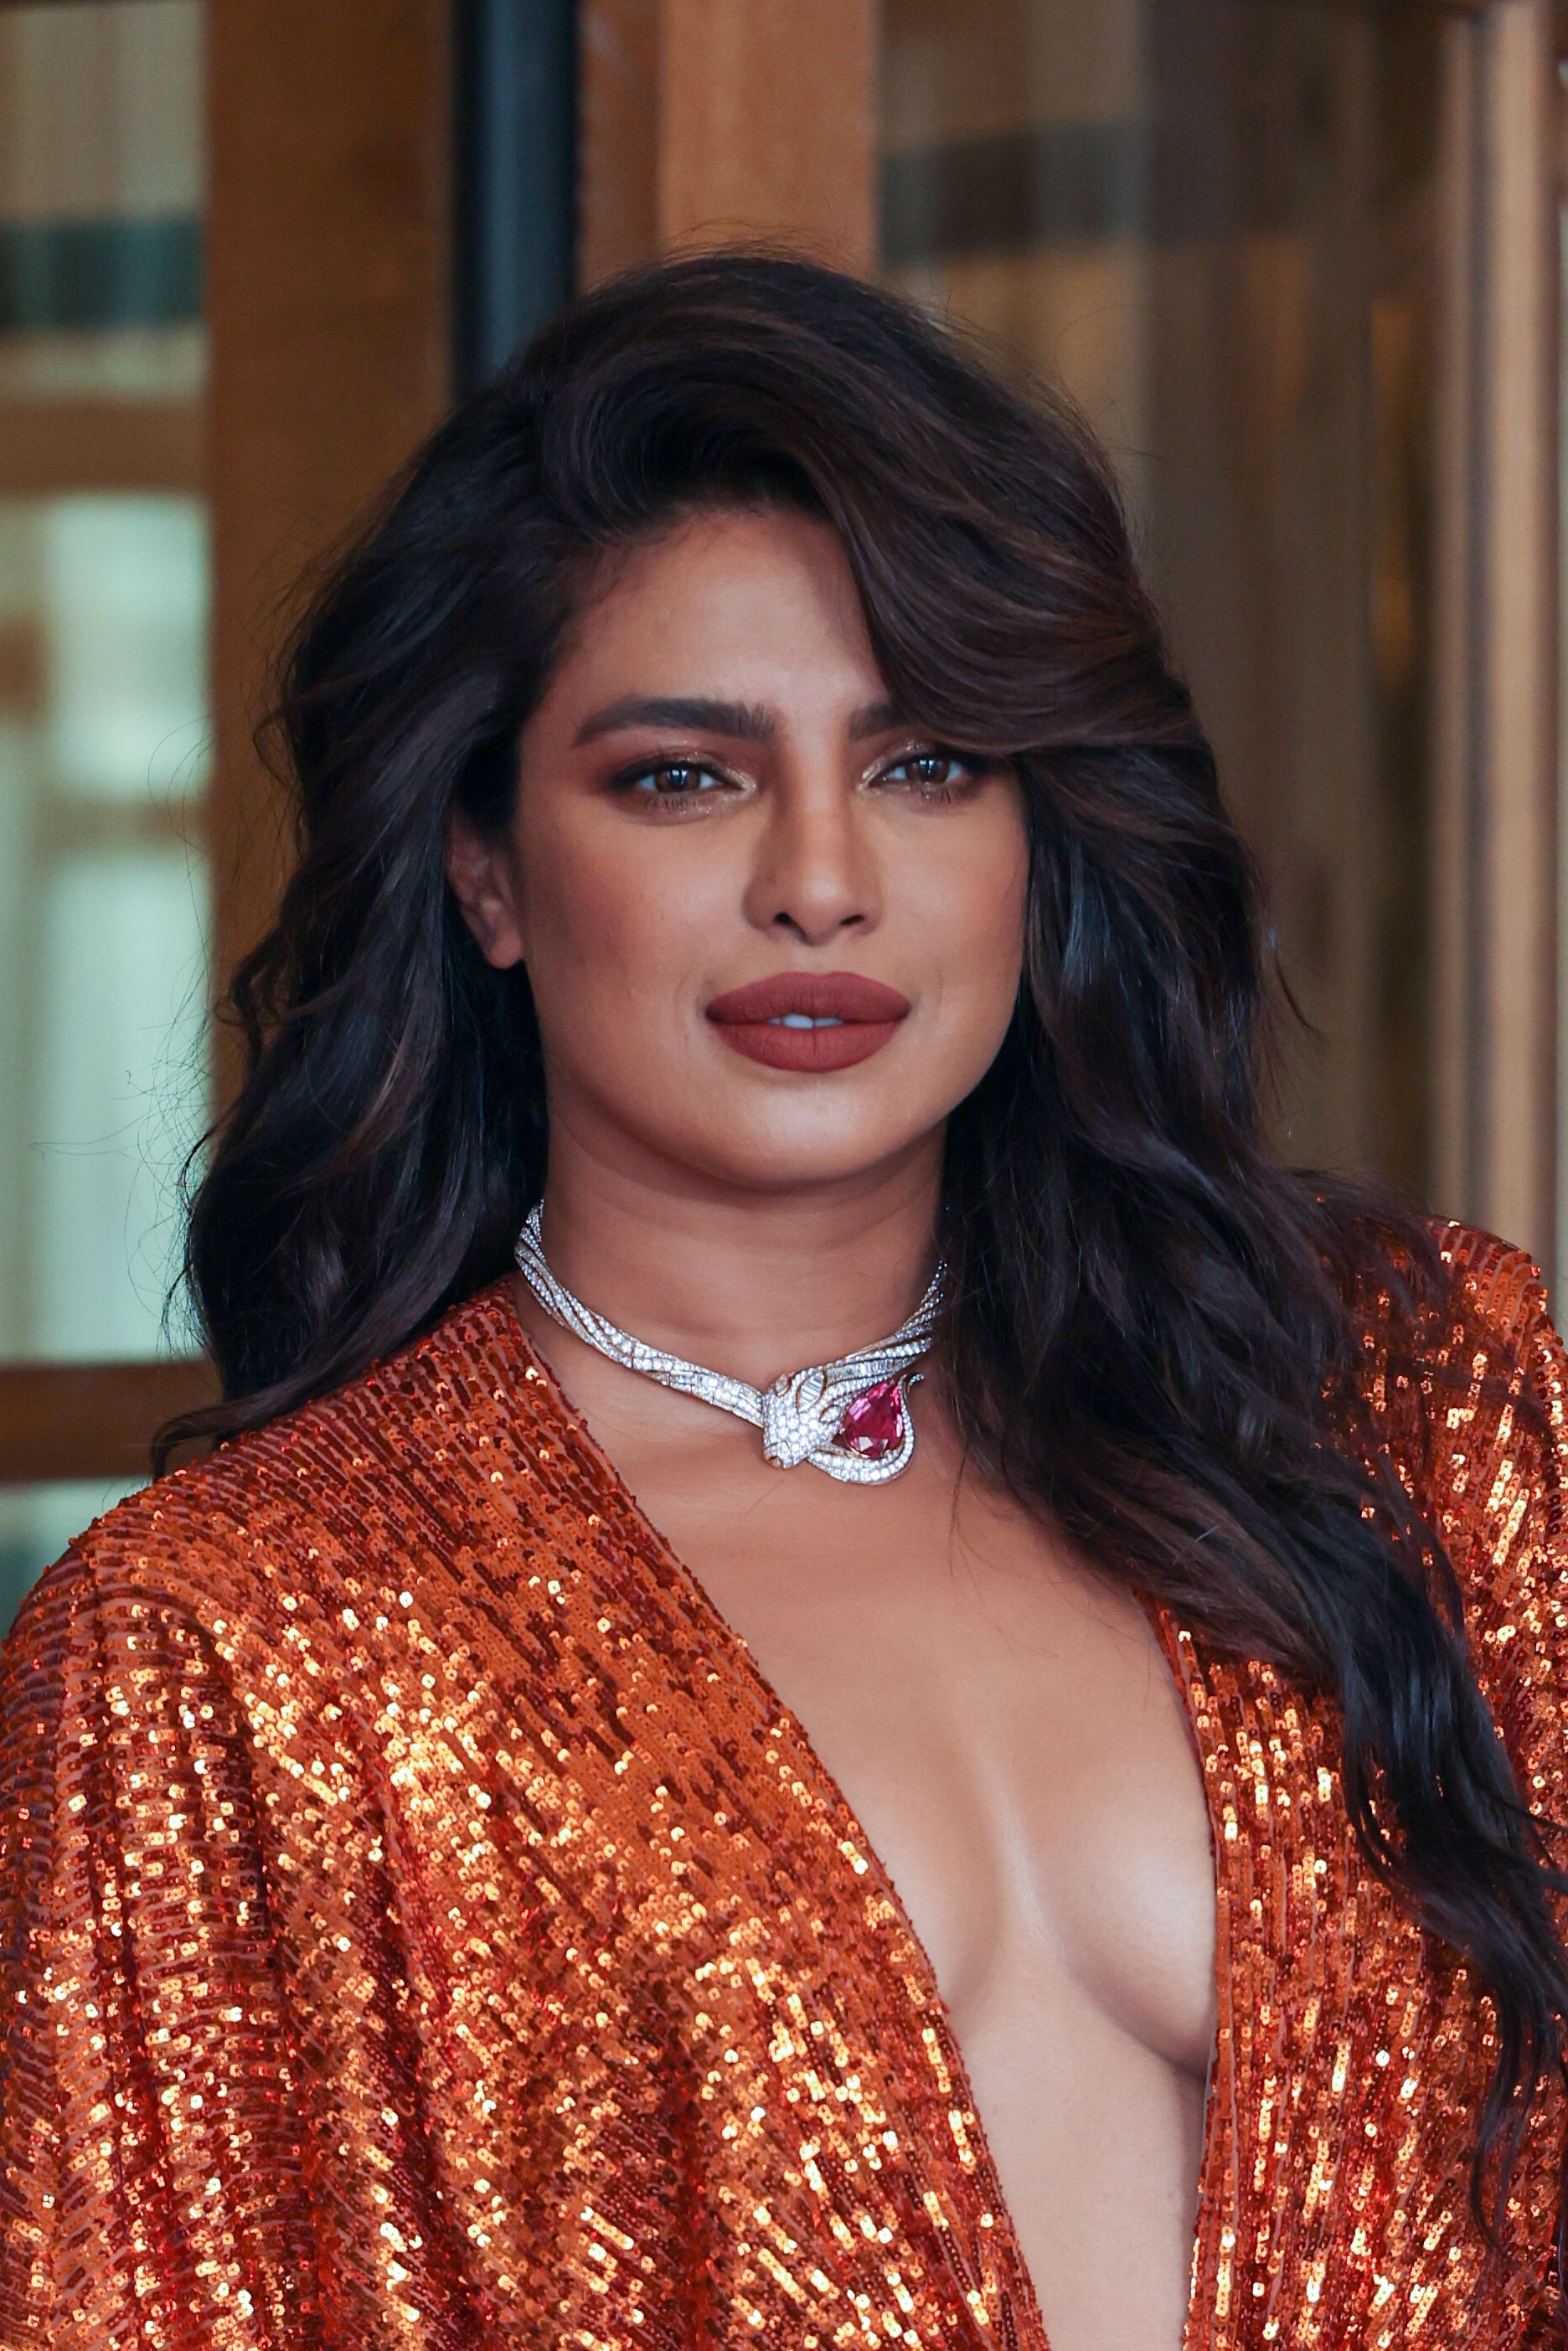 Her tight boobs are reasonwhy I love her. Want to remove her dress and suck  her boobs 👅👄🍼💦 . . #priyankachopra #hotactress #h